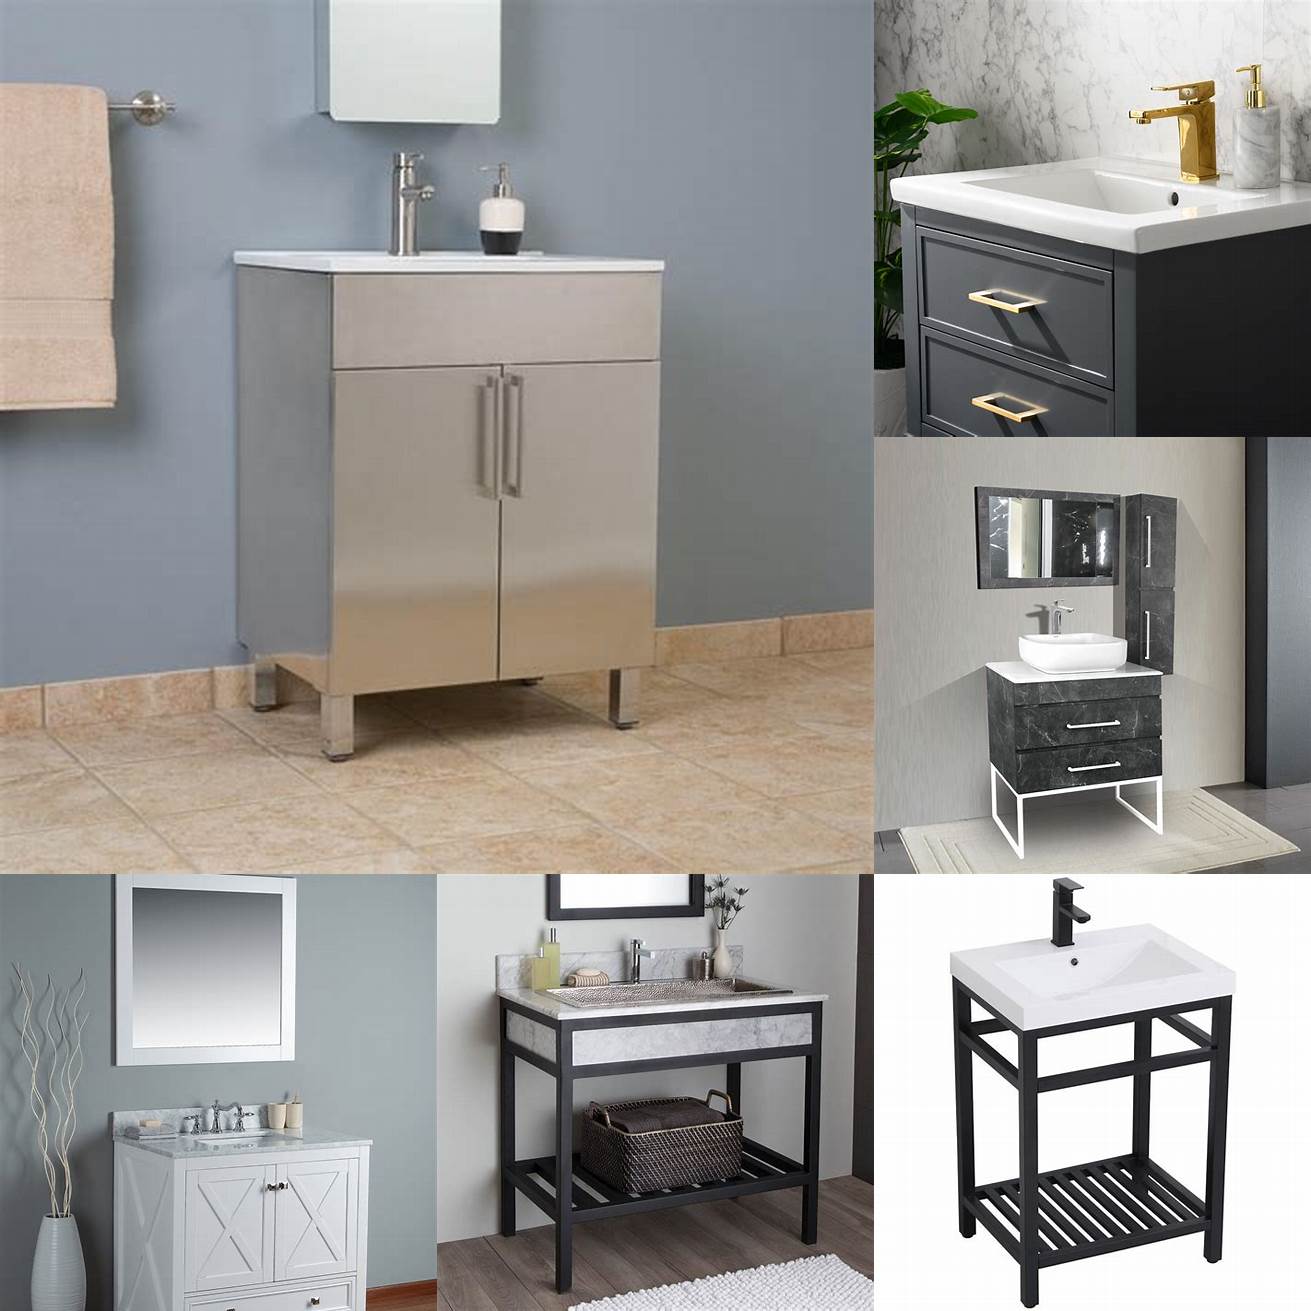 1 Durability Metal vanities are sturdy and resistant to water damage making them a long-lasting option for your bathroom